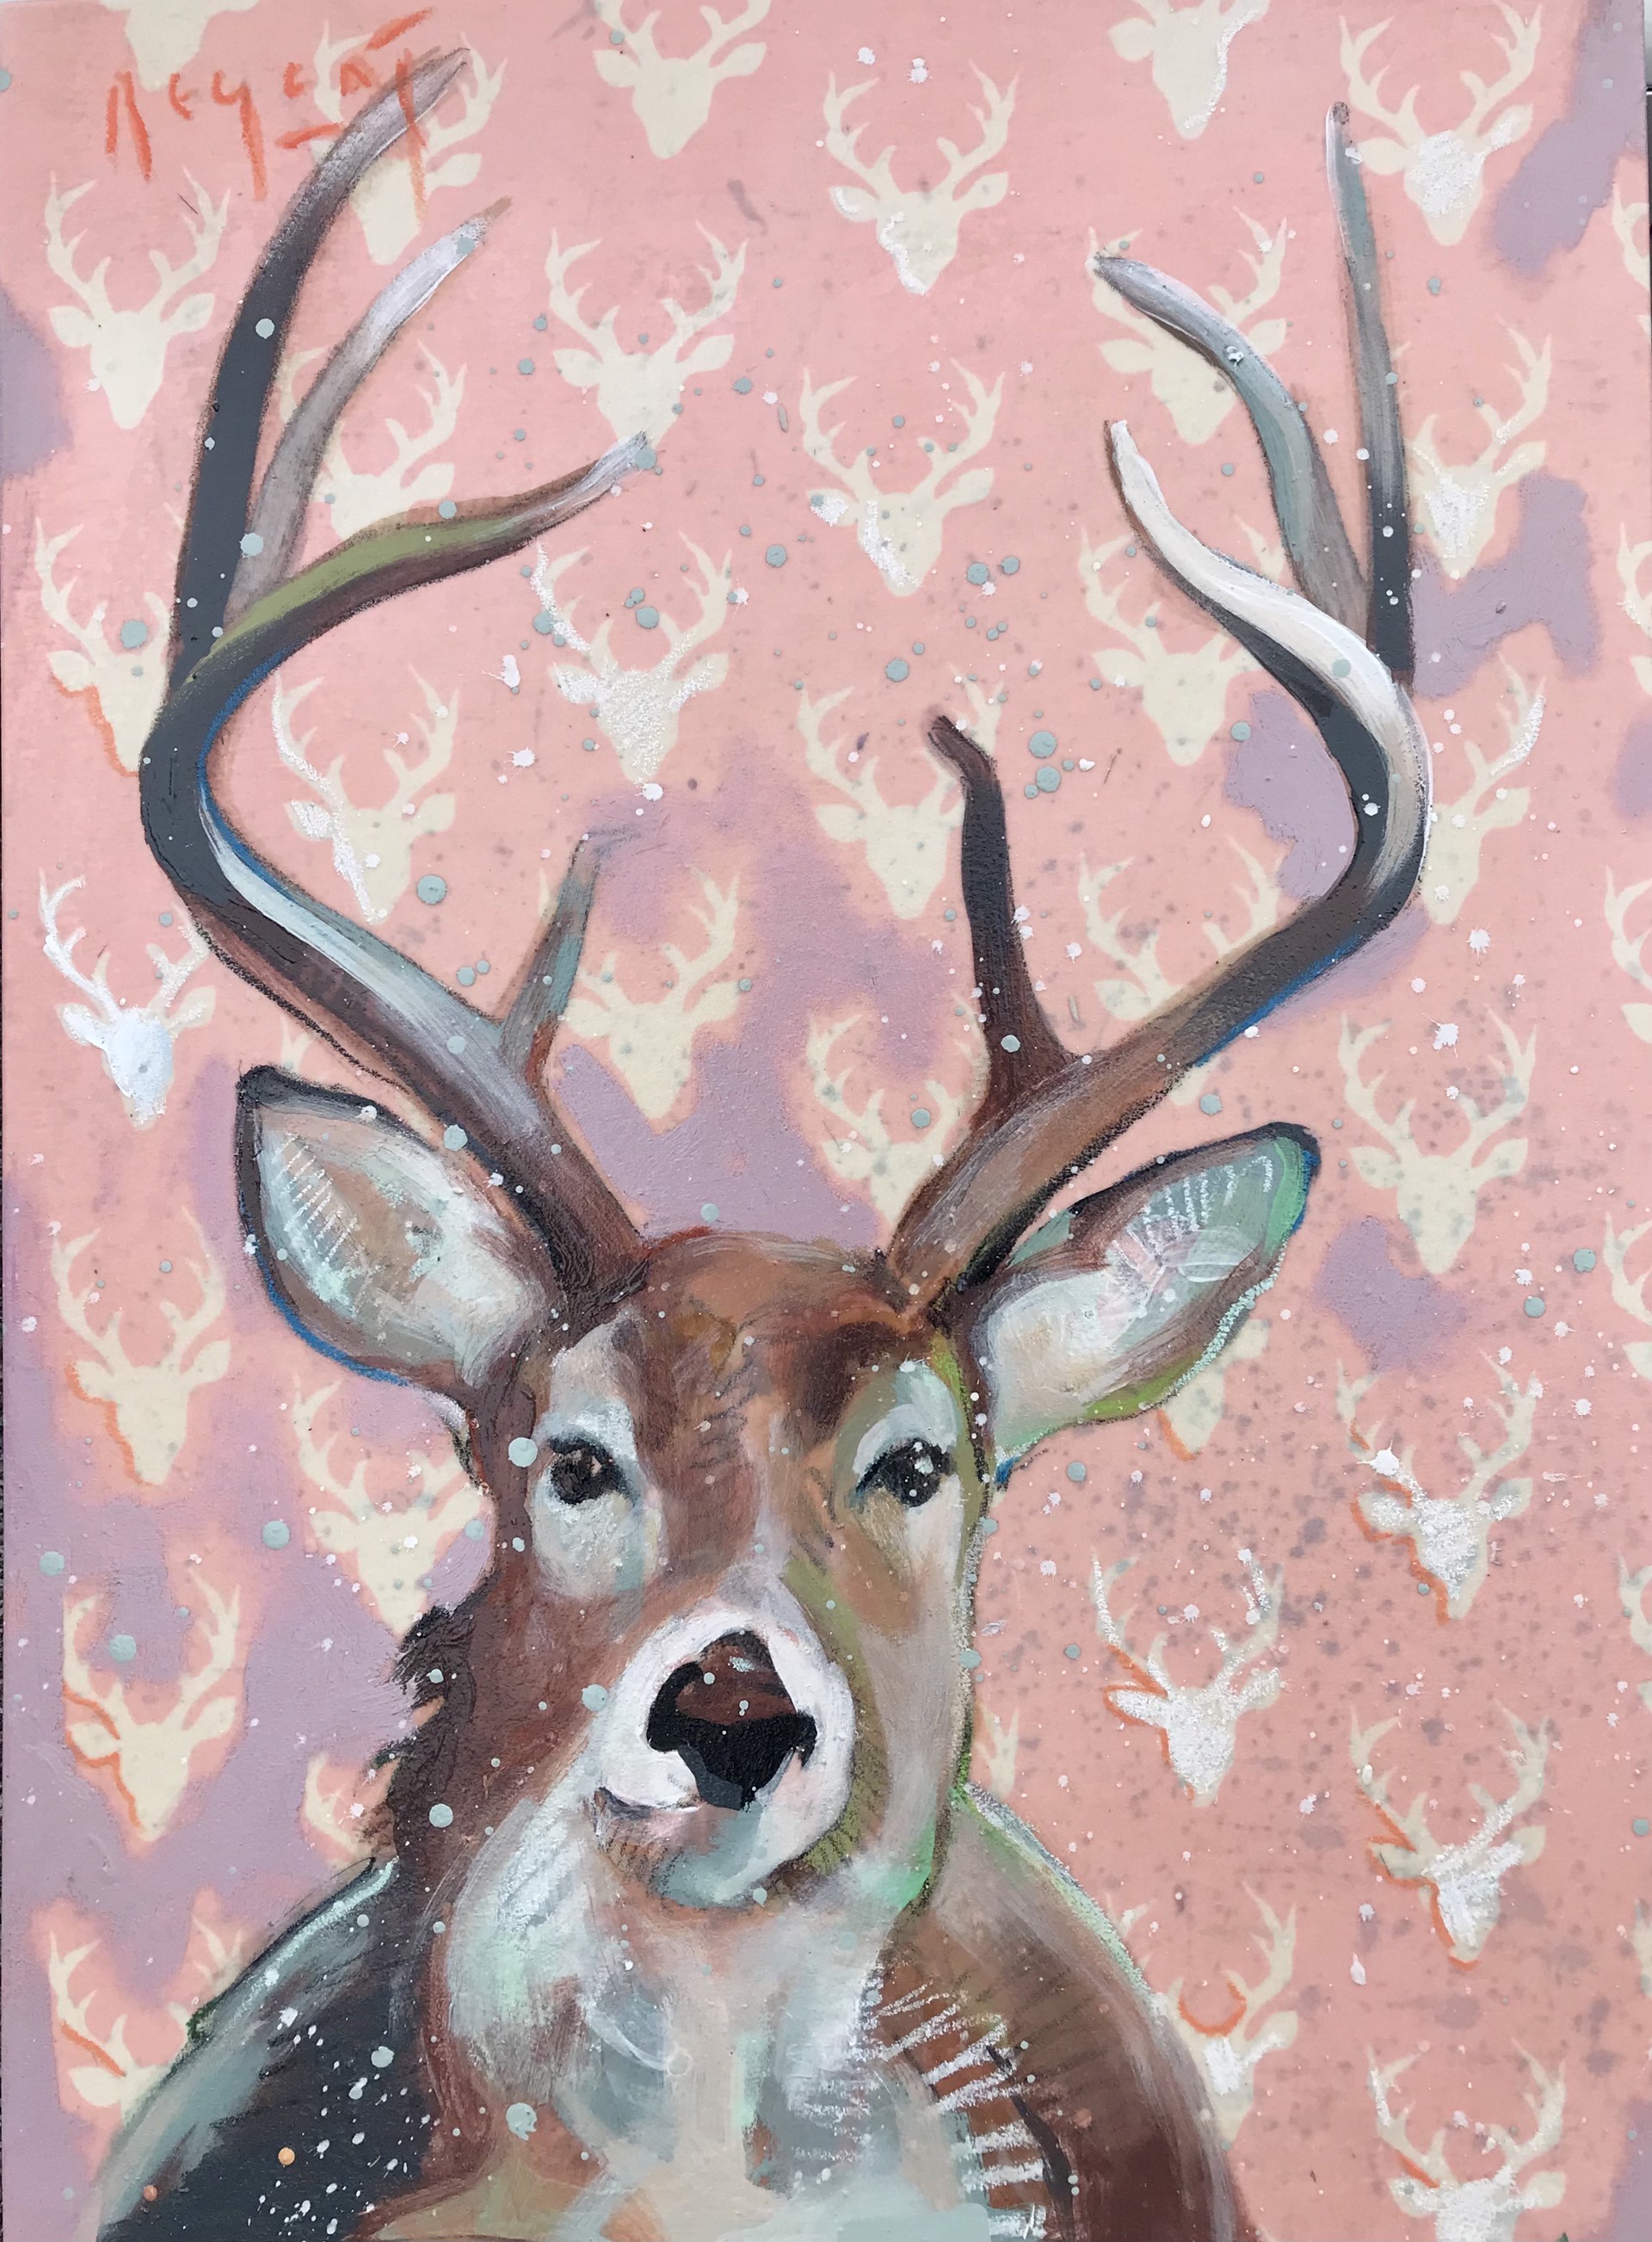 8 PT in Pink No. 3 by Tim Jaeger